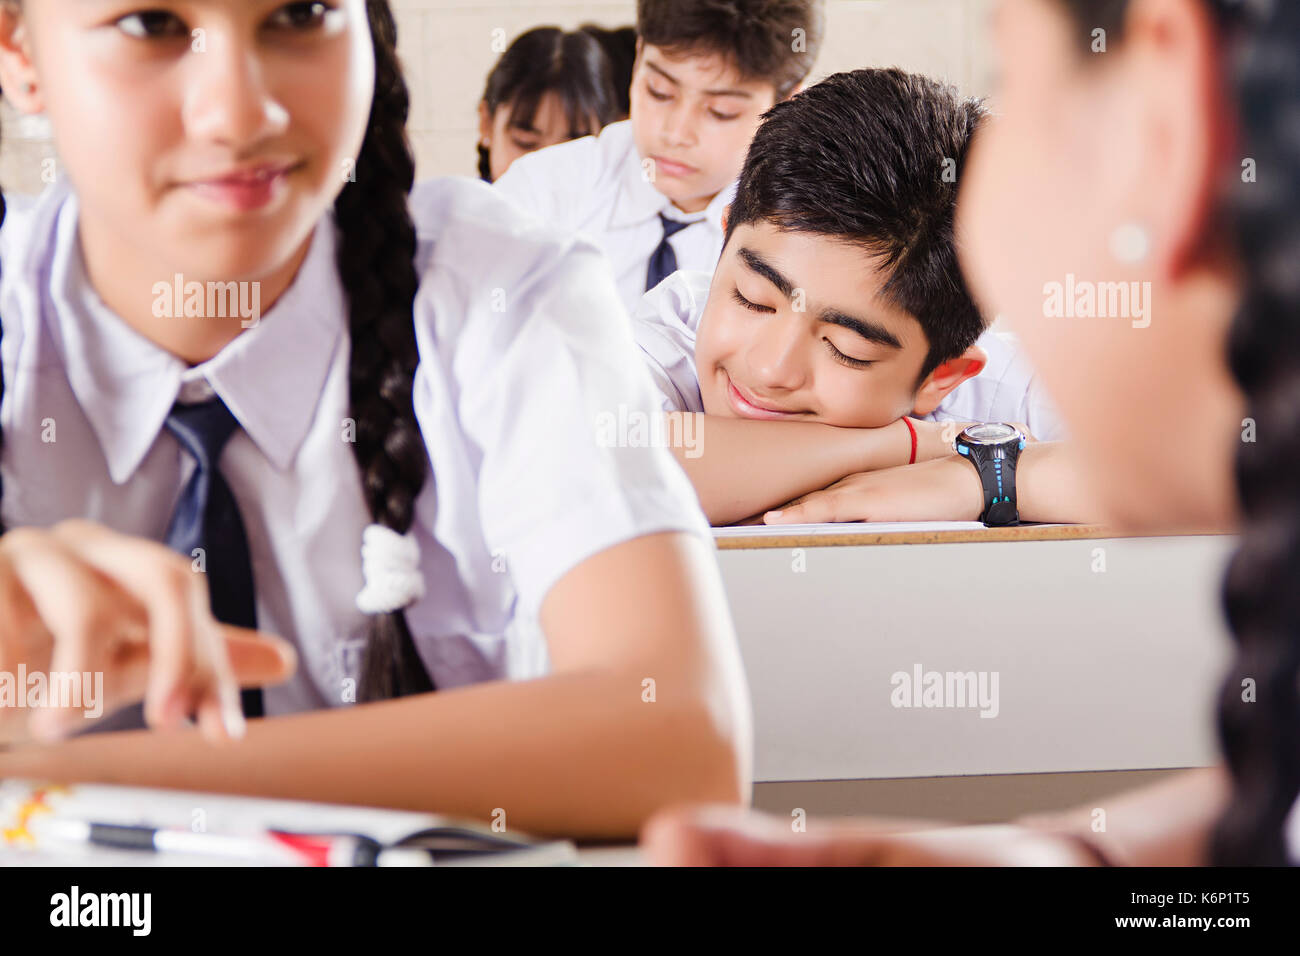 High School Boy Student Sleeping In Glass With Classmate Stock Photo